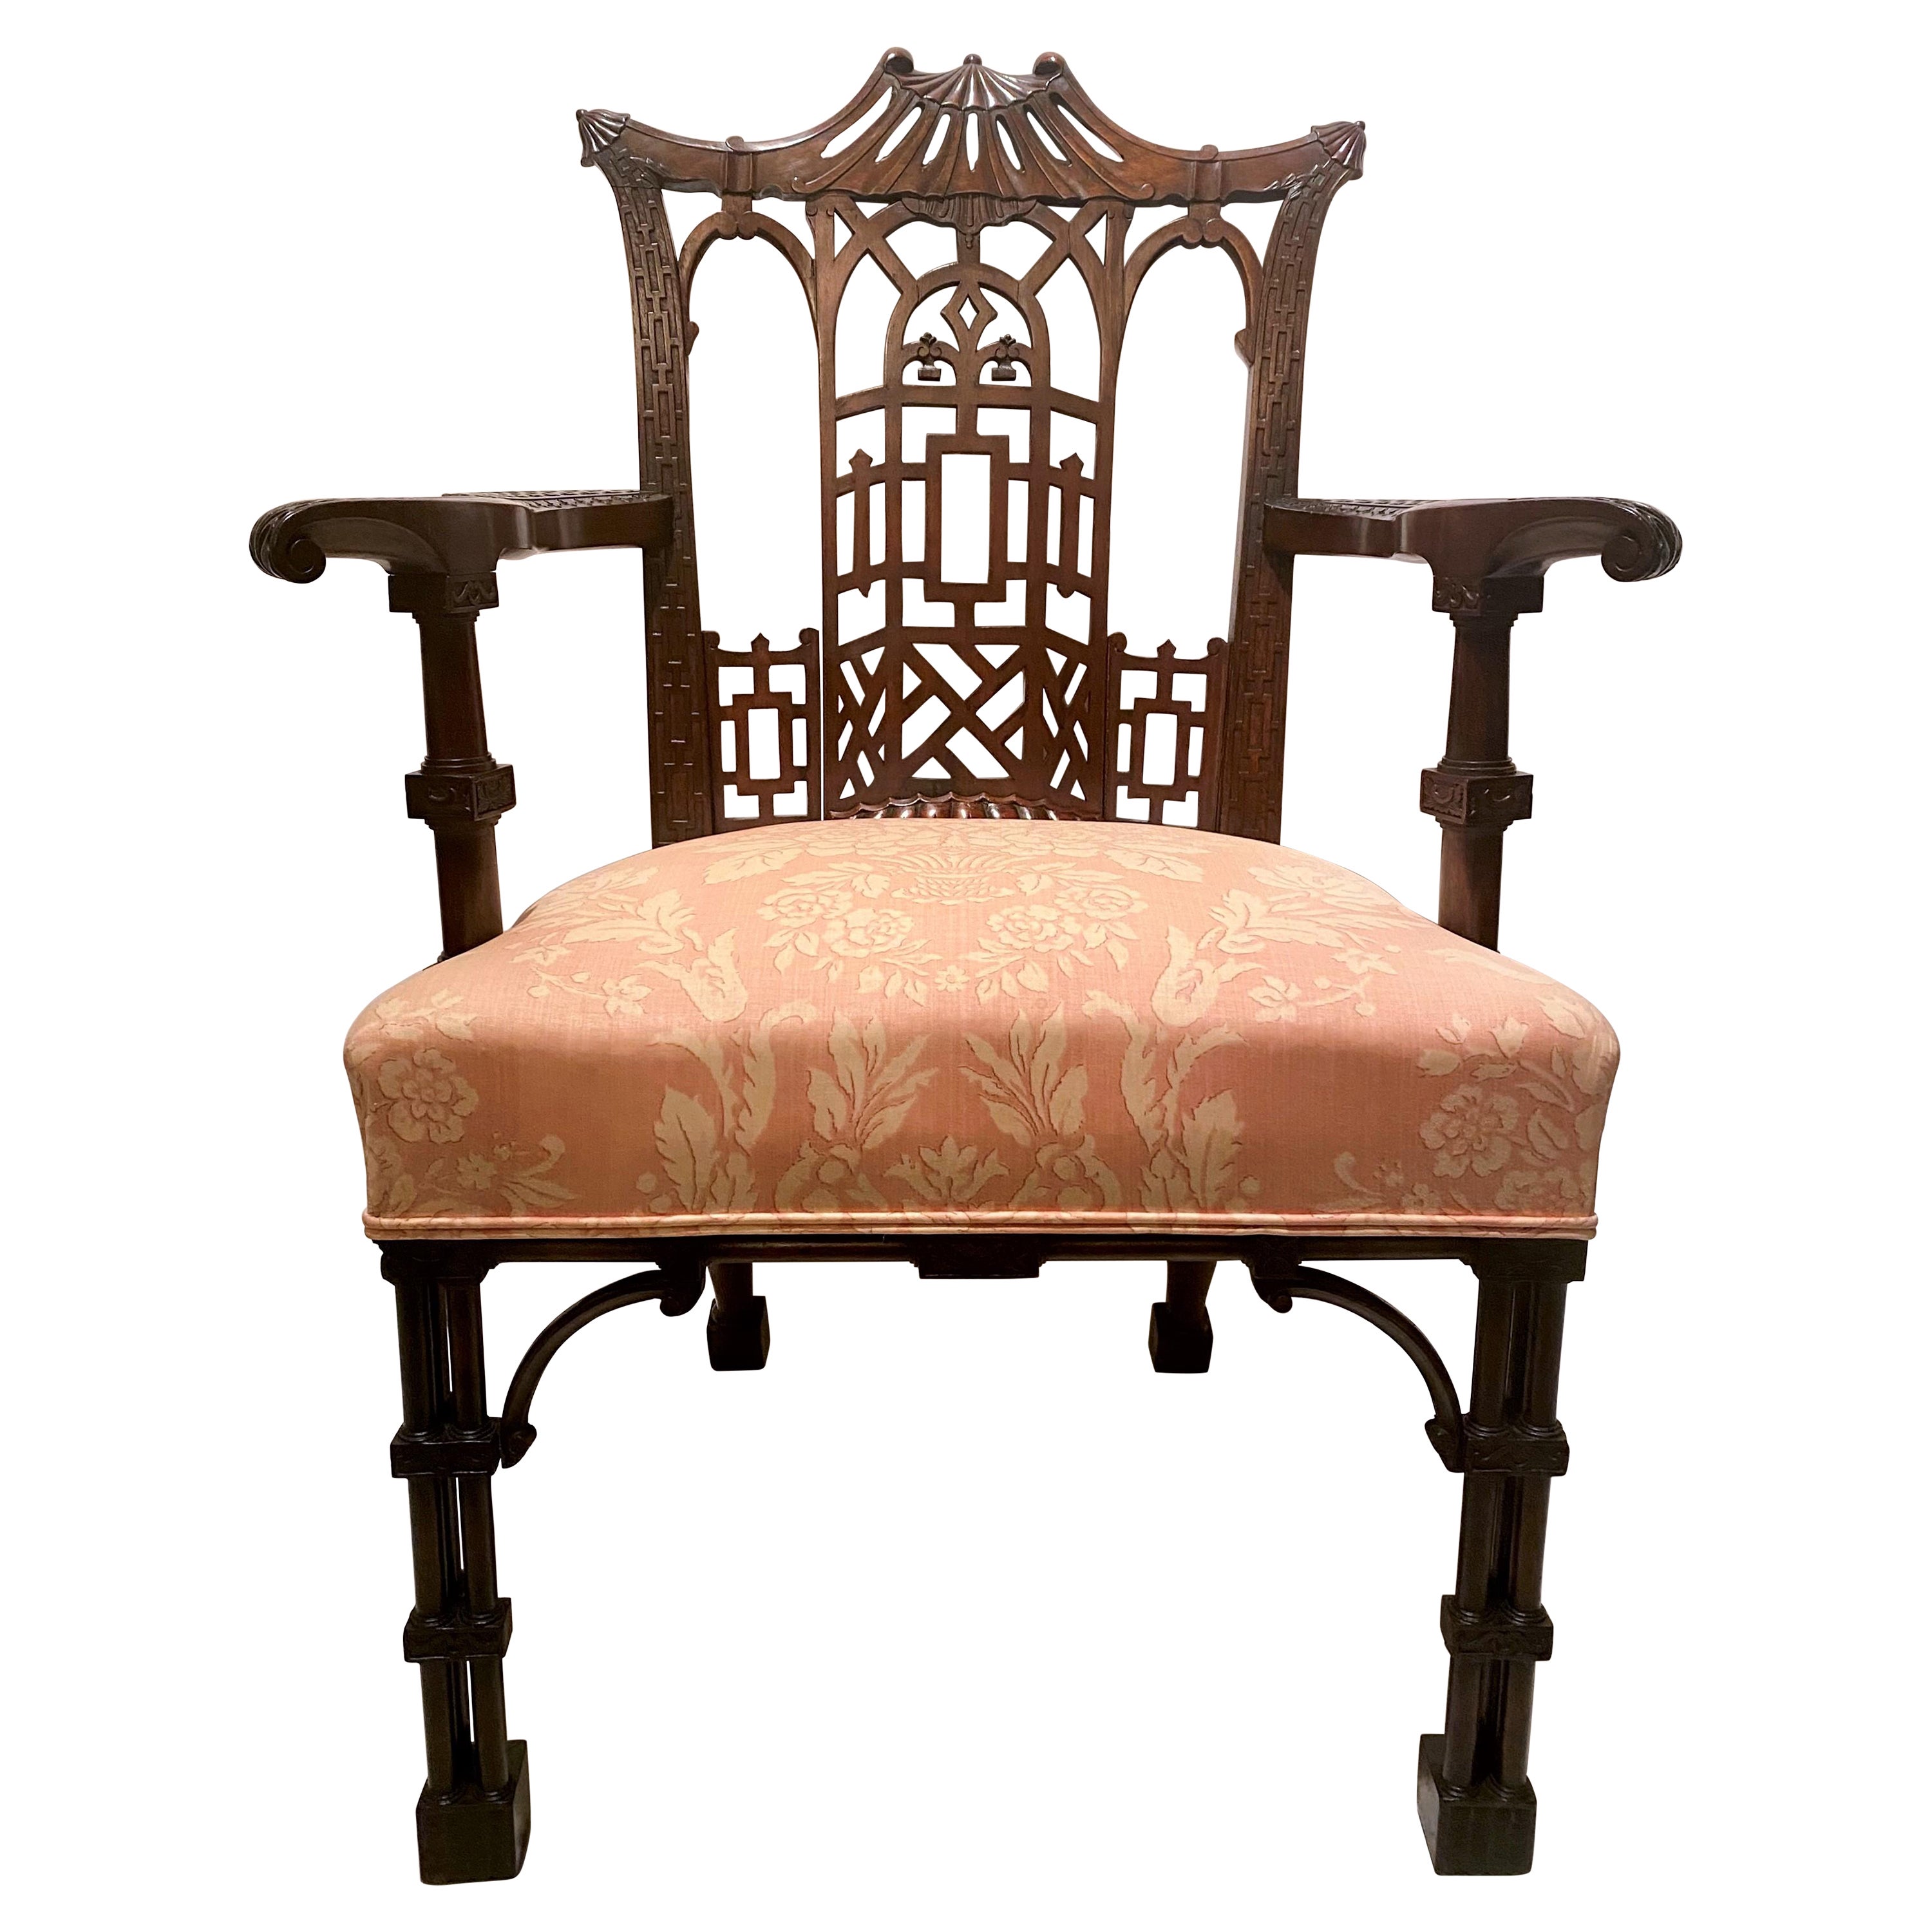 Antique English Chippendale Mahogany Fretwork Armchair, Circa 1850-1870 For Sale